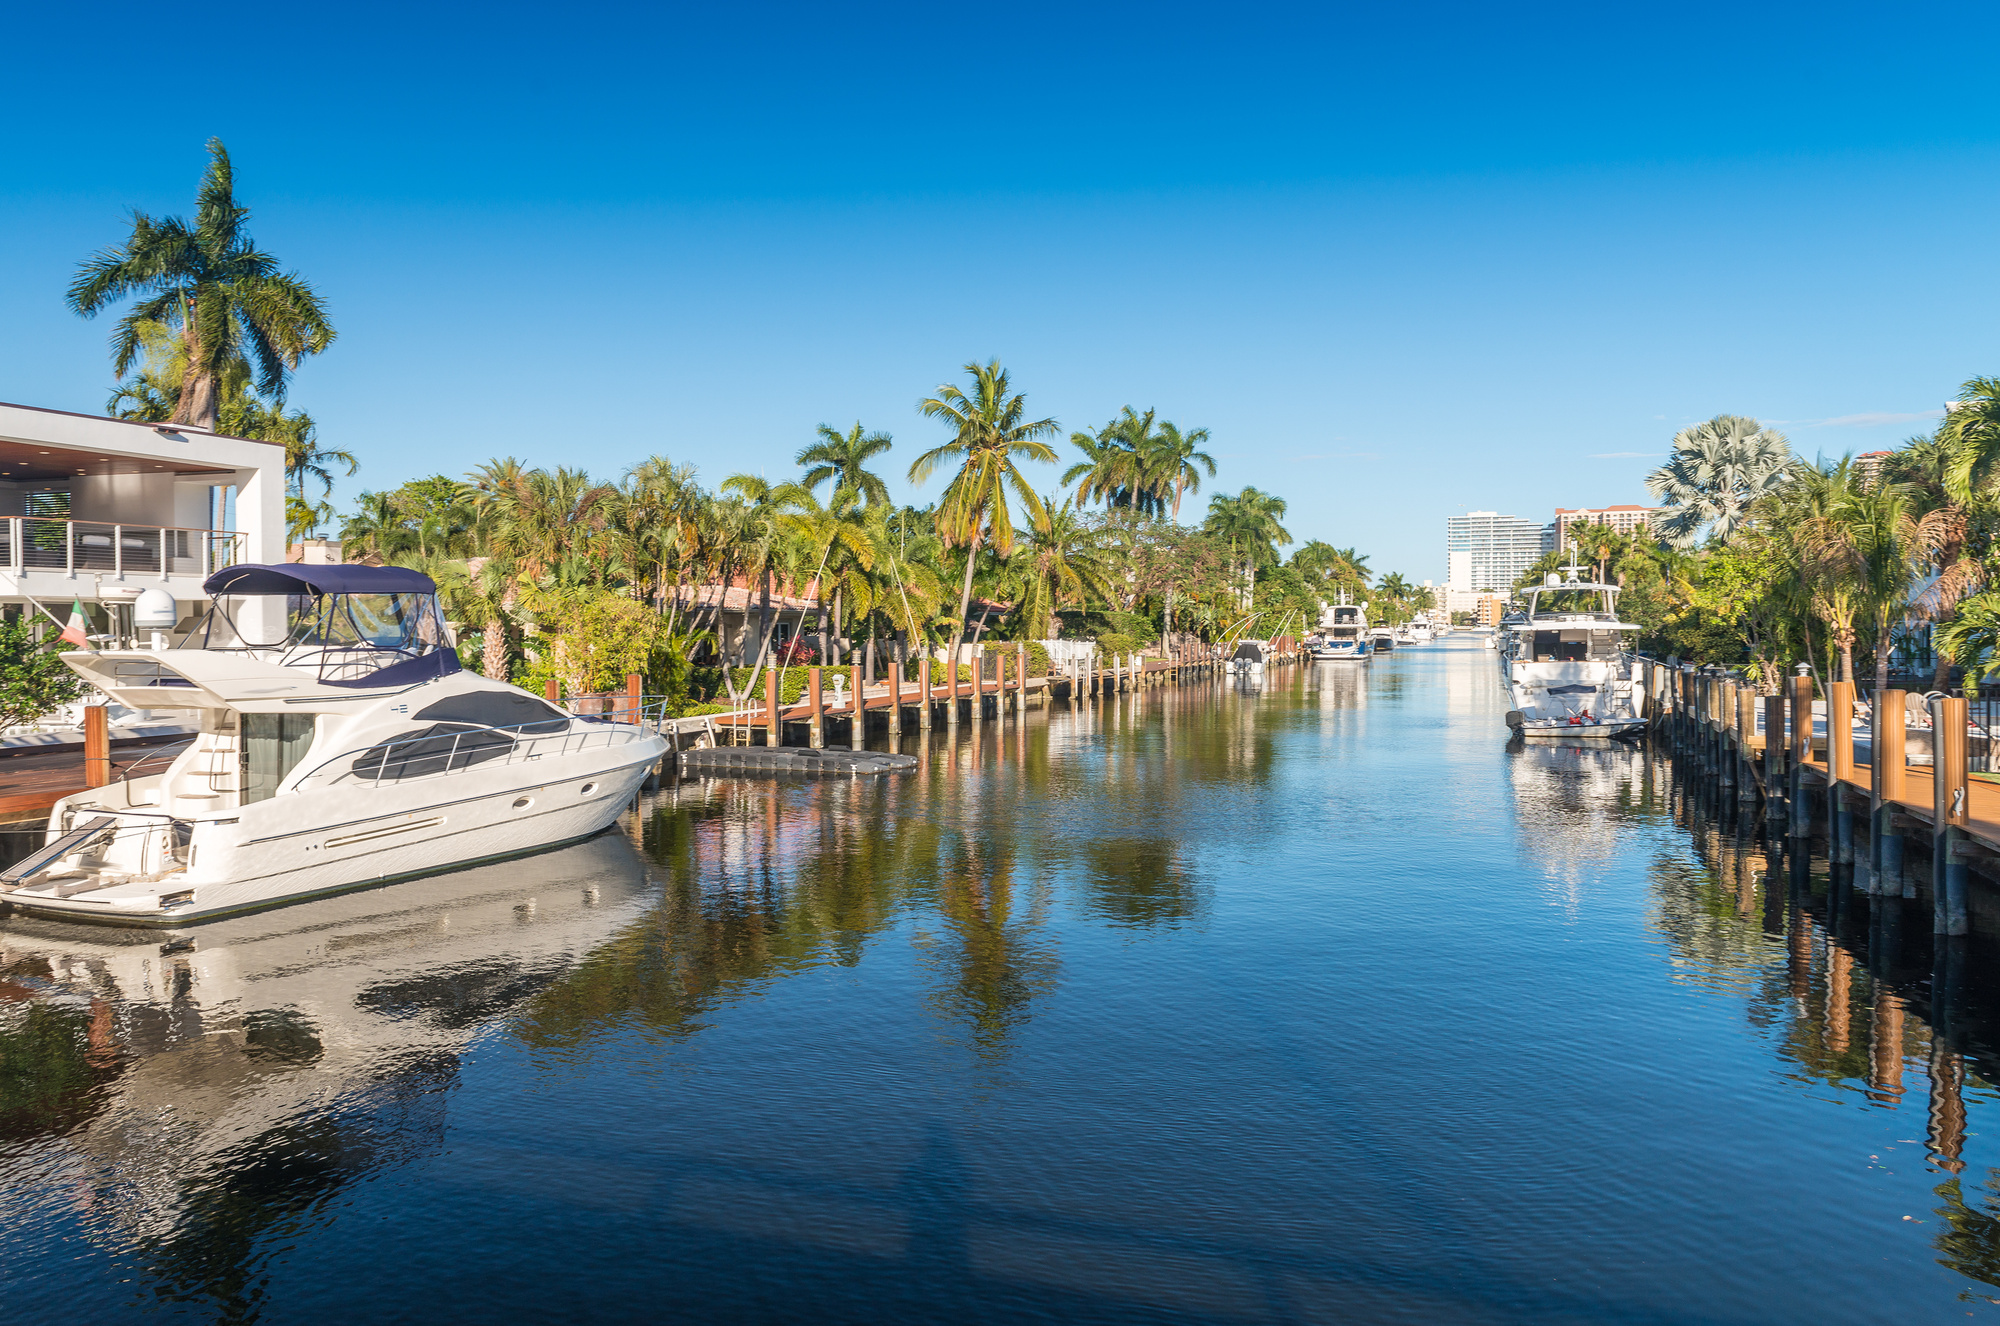 Fort Lauderdale Real Estate: Should You Make the Investment?